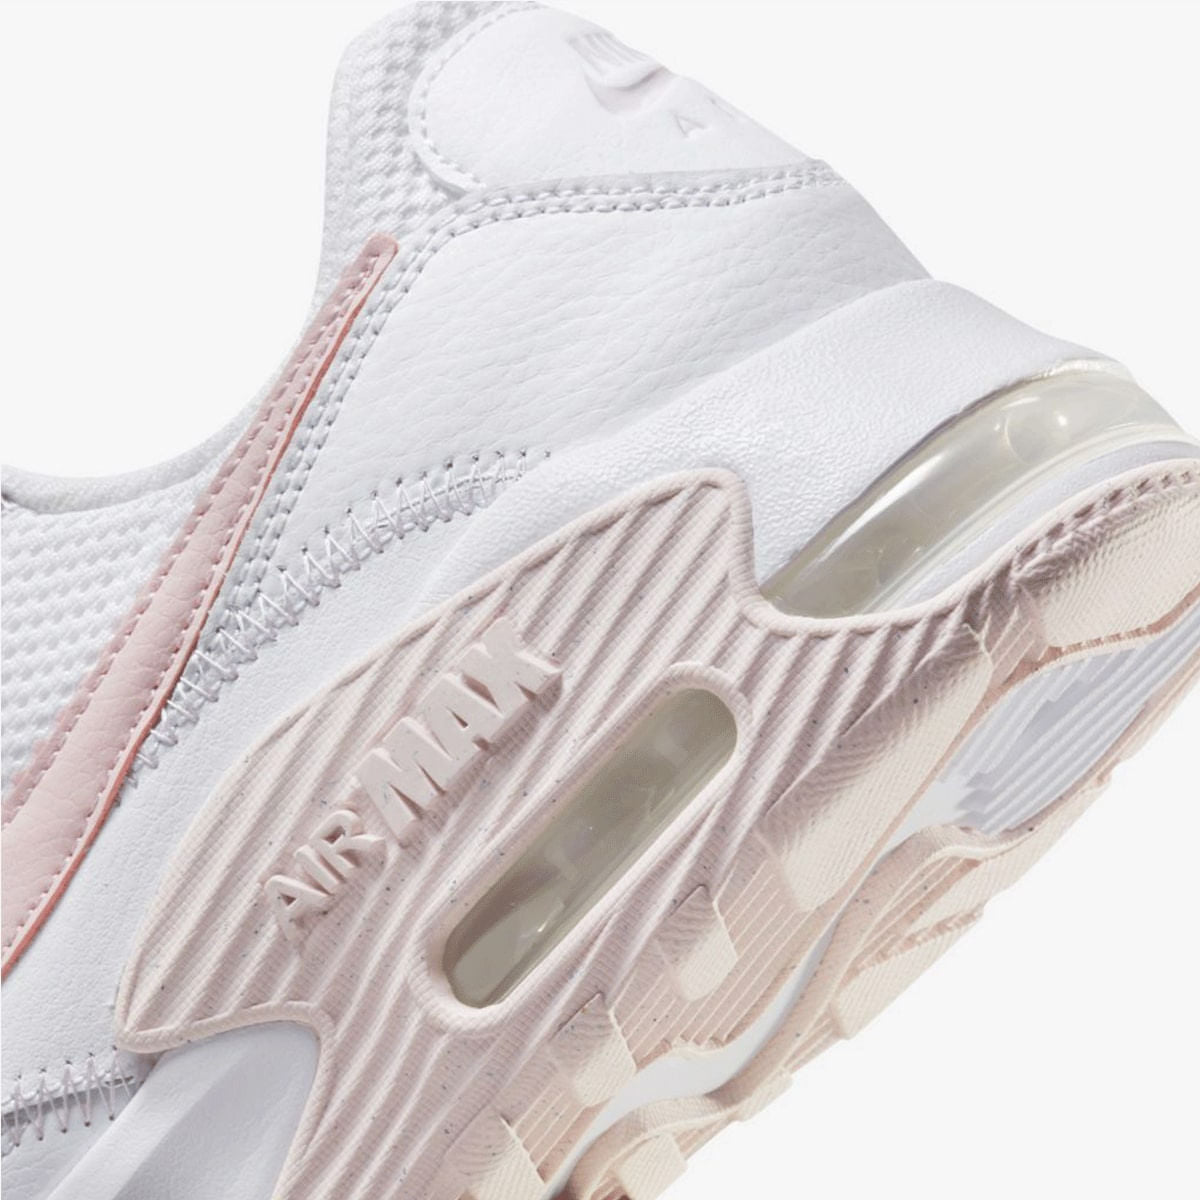 NIKE WOMENS AIR MAX EXCEE - WHITE/BARELY ROSE